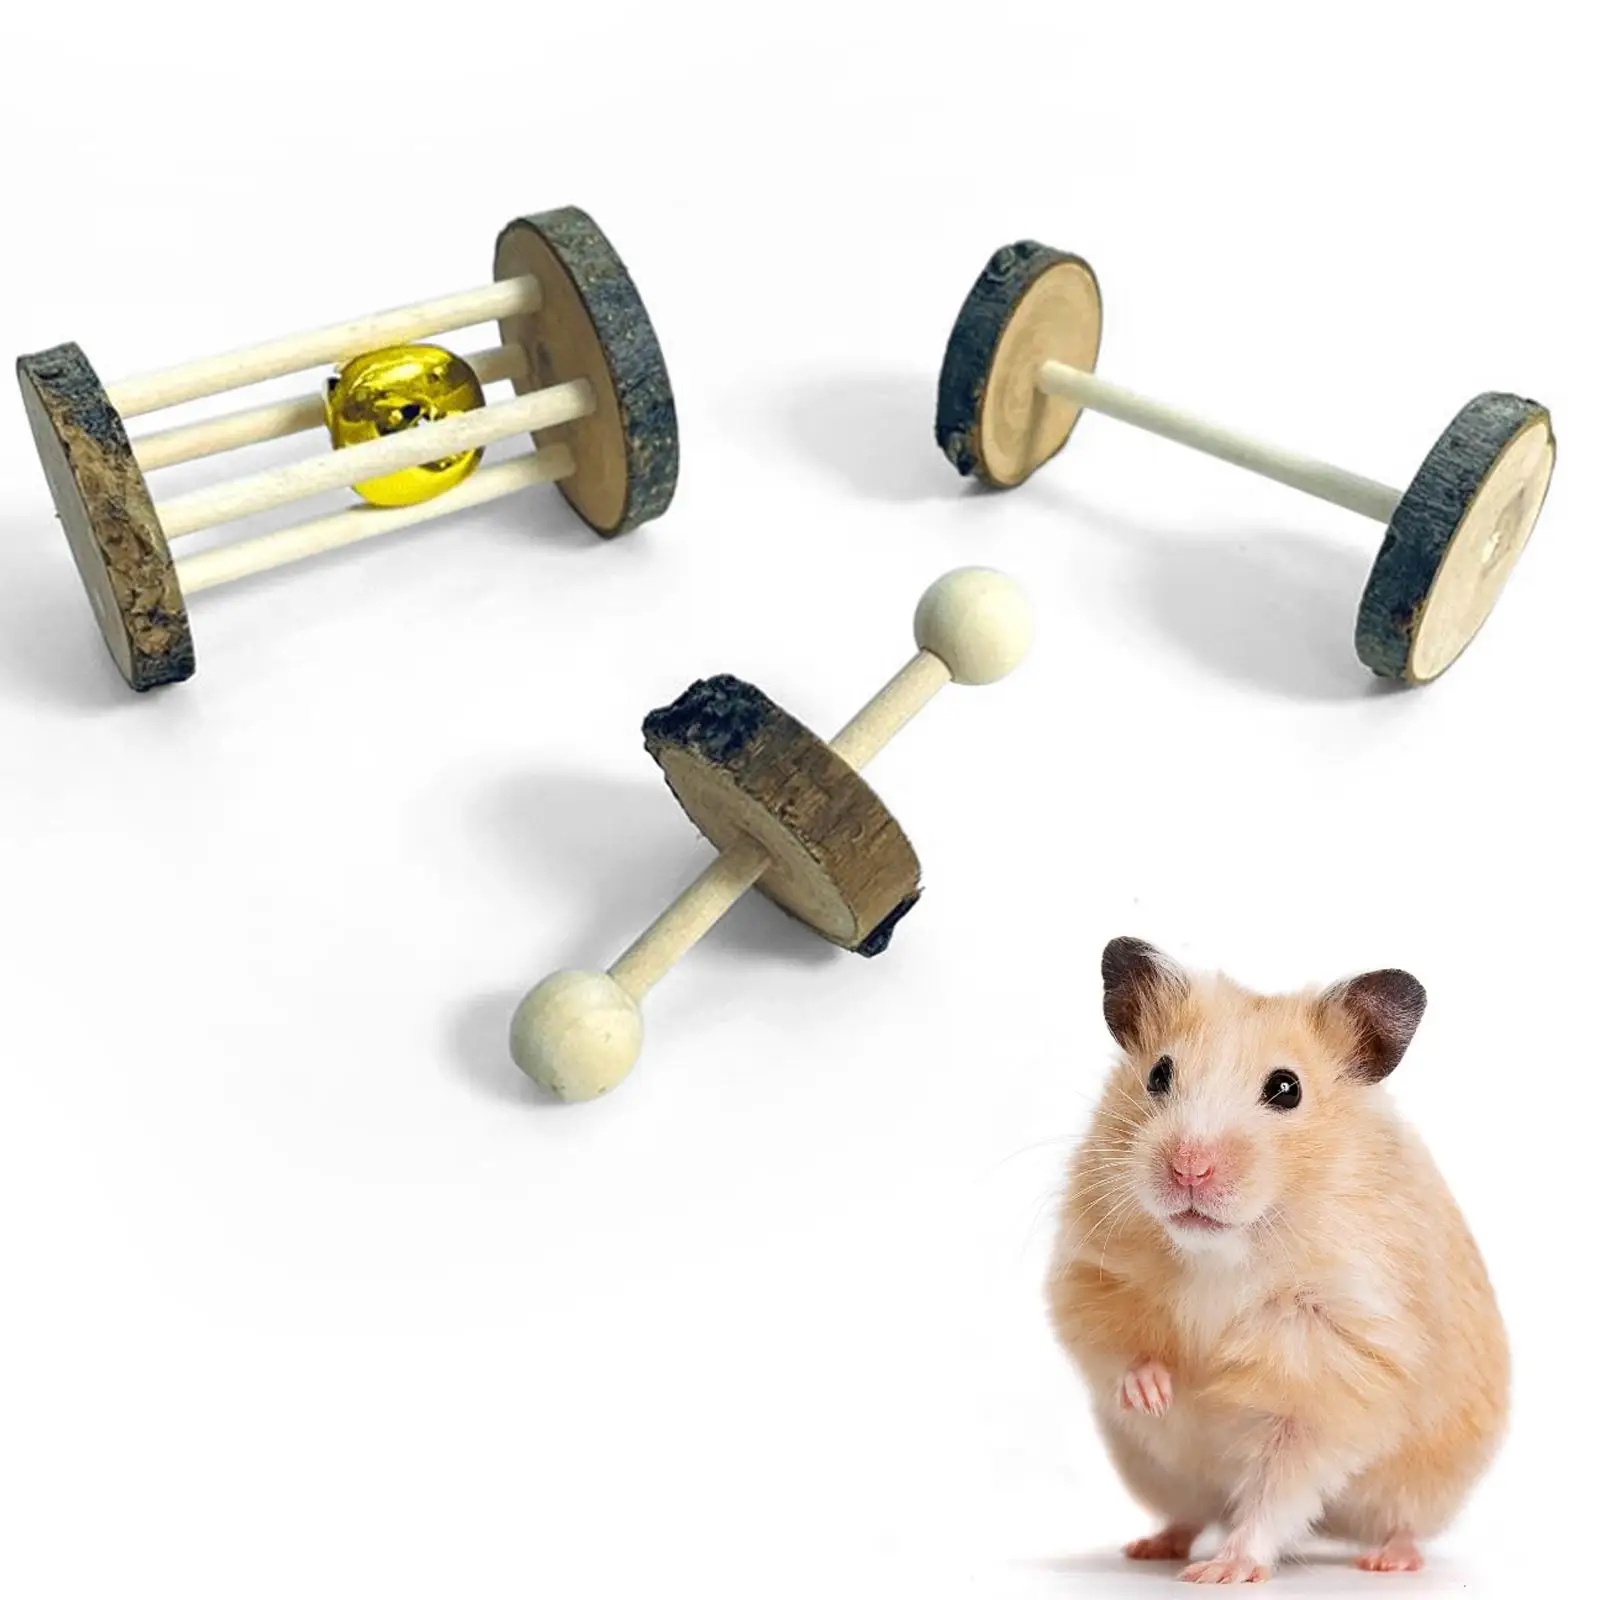 3 Pieces Wooden Pets Supplies Dumbbell Chewing Nibble Toy Small Animals Hamster Cage Accessories Hamster Toy Pet Wooden Toys